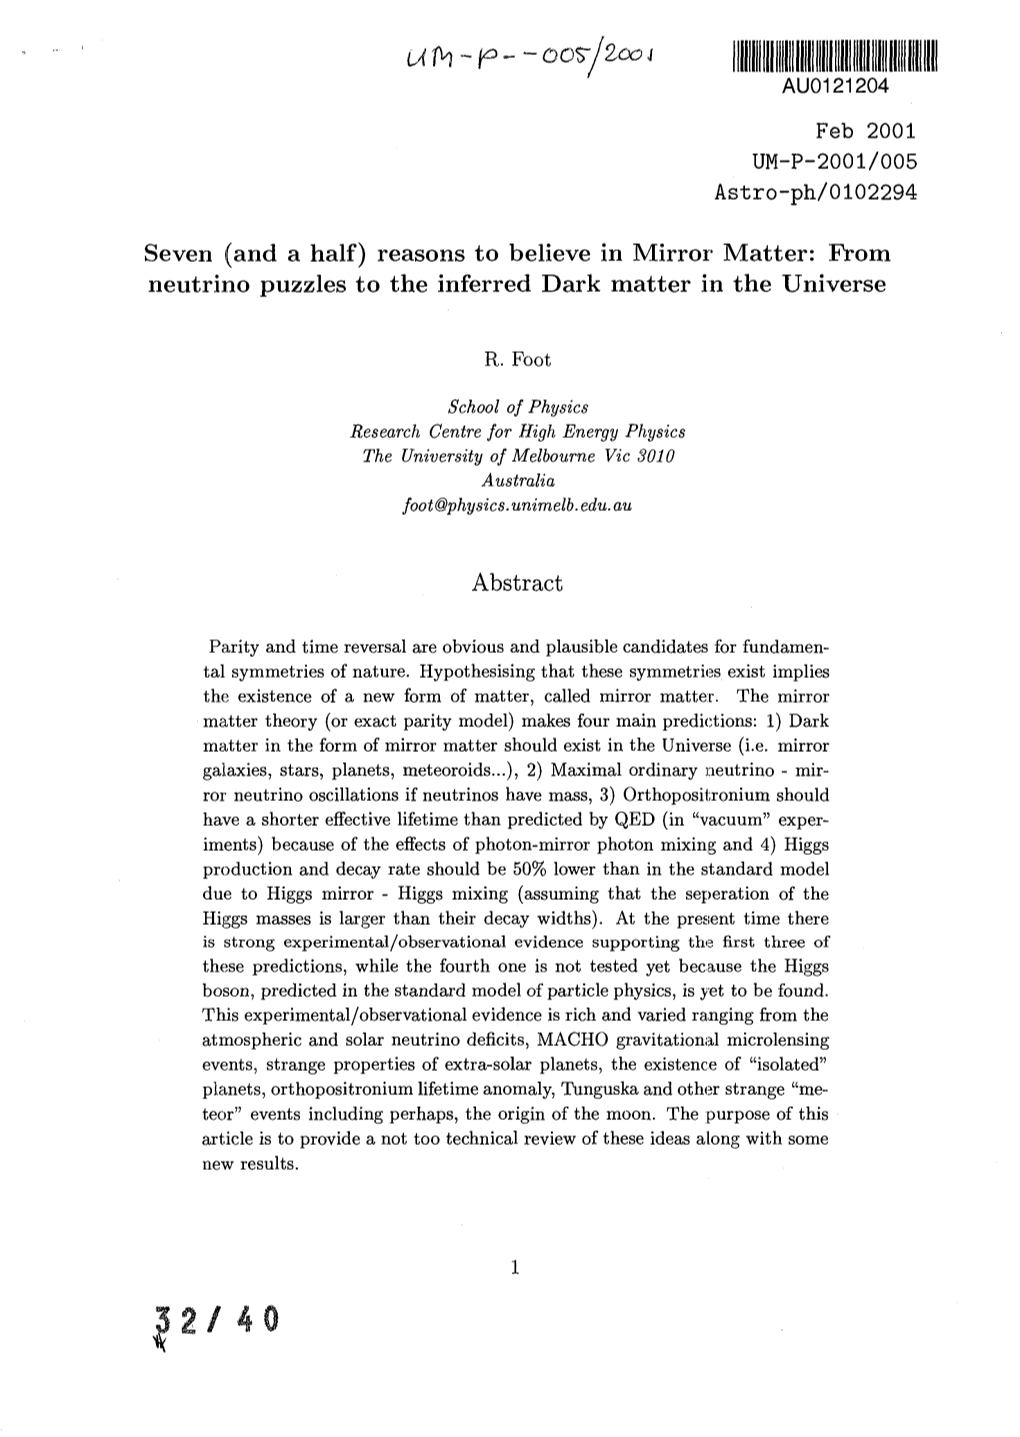 Reasons to Believe in Mirror Matter: from Neutrino Puzzles to the Inferred Dark Matter in the Universe